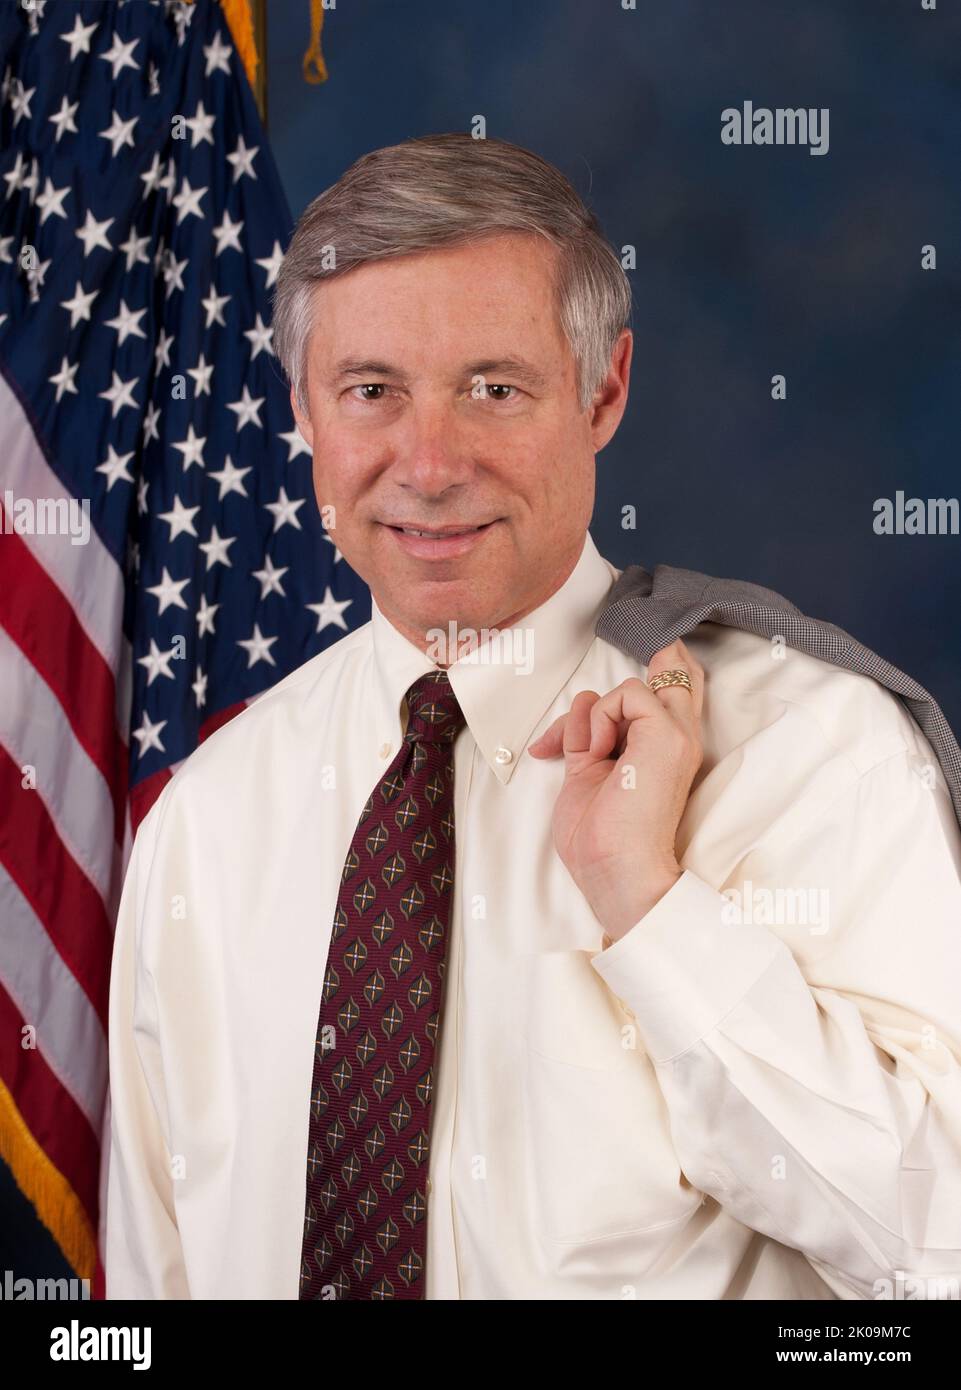 Frederick Stephen Upton (born April 23, 1953) is an American politician serving as the U.S. Representative for Michigan's 6th congressional district since 1987. He voted for the impeachment of Bill Clinton in 1998 and the second impeachment of Donald Trump in 2021. In the latter case, he was one of ten Republicans who voted to impeach Trump. Stock Photo